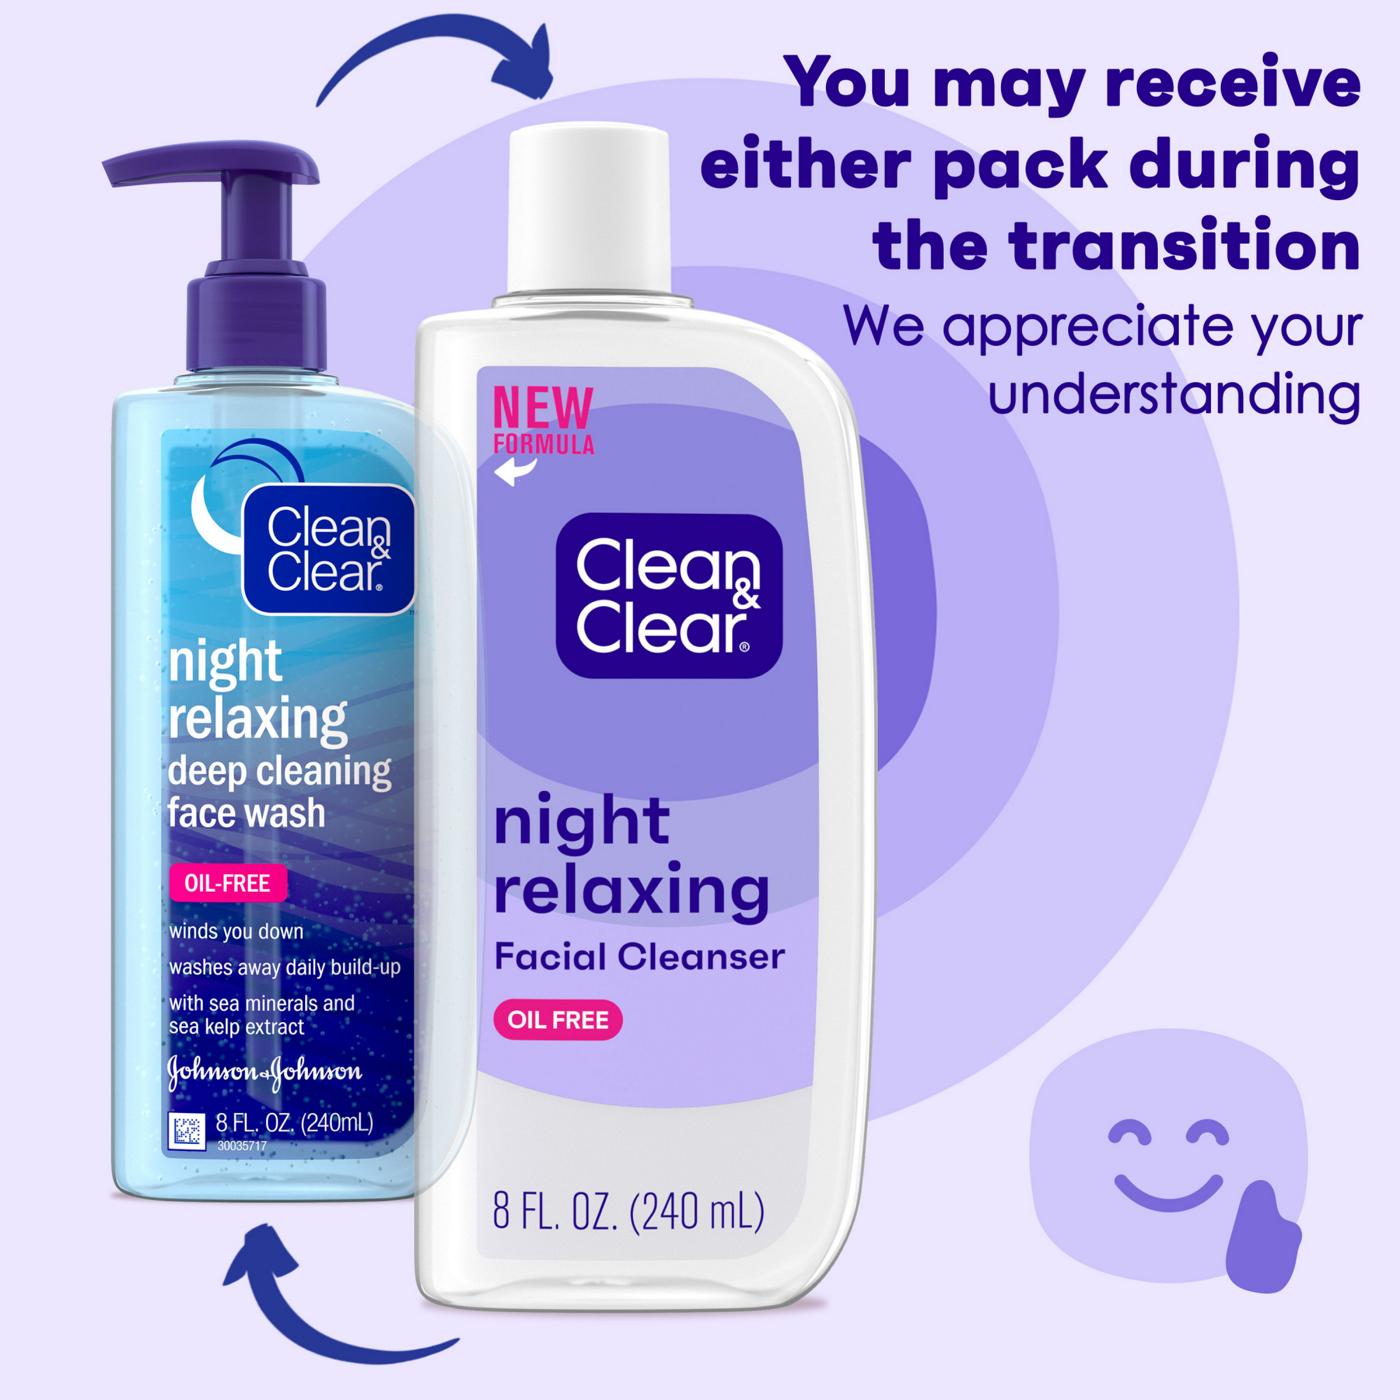 Clean & Clear Night Relaxing Deep Cleaning Face Wash; image 2 of 8